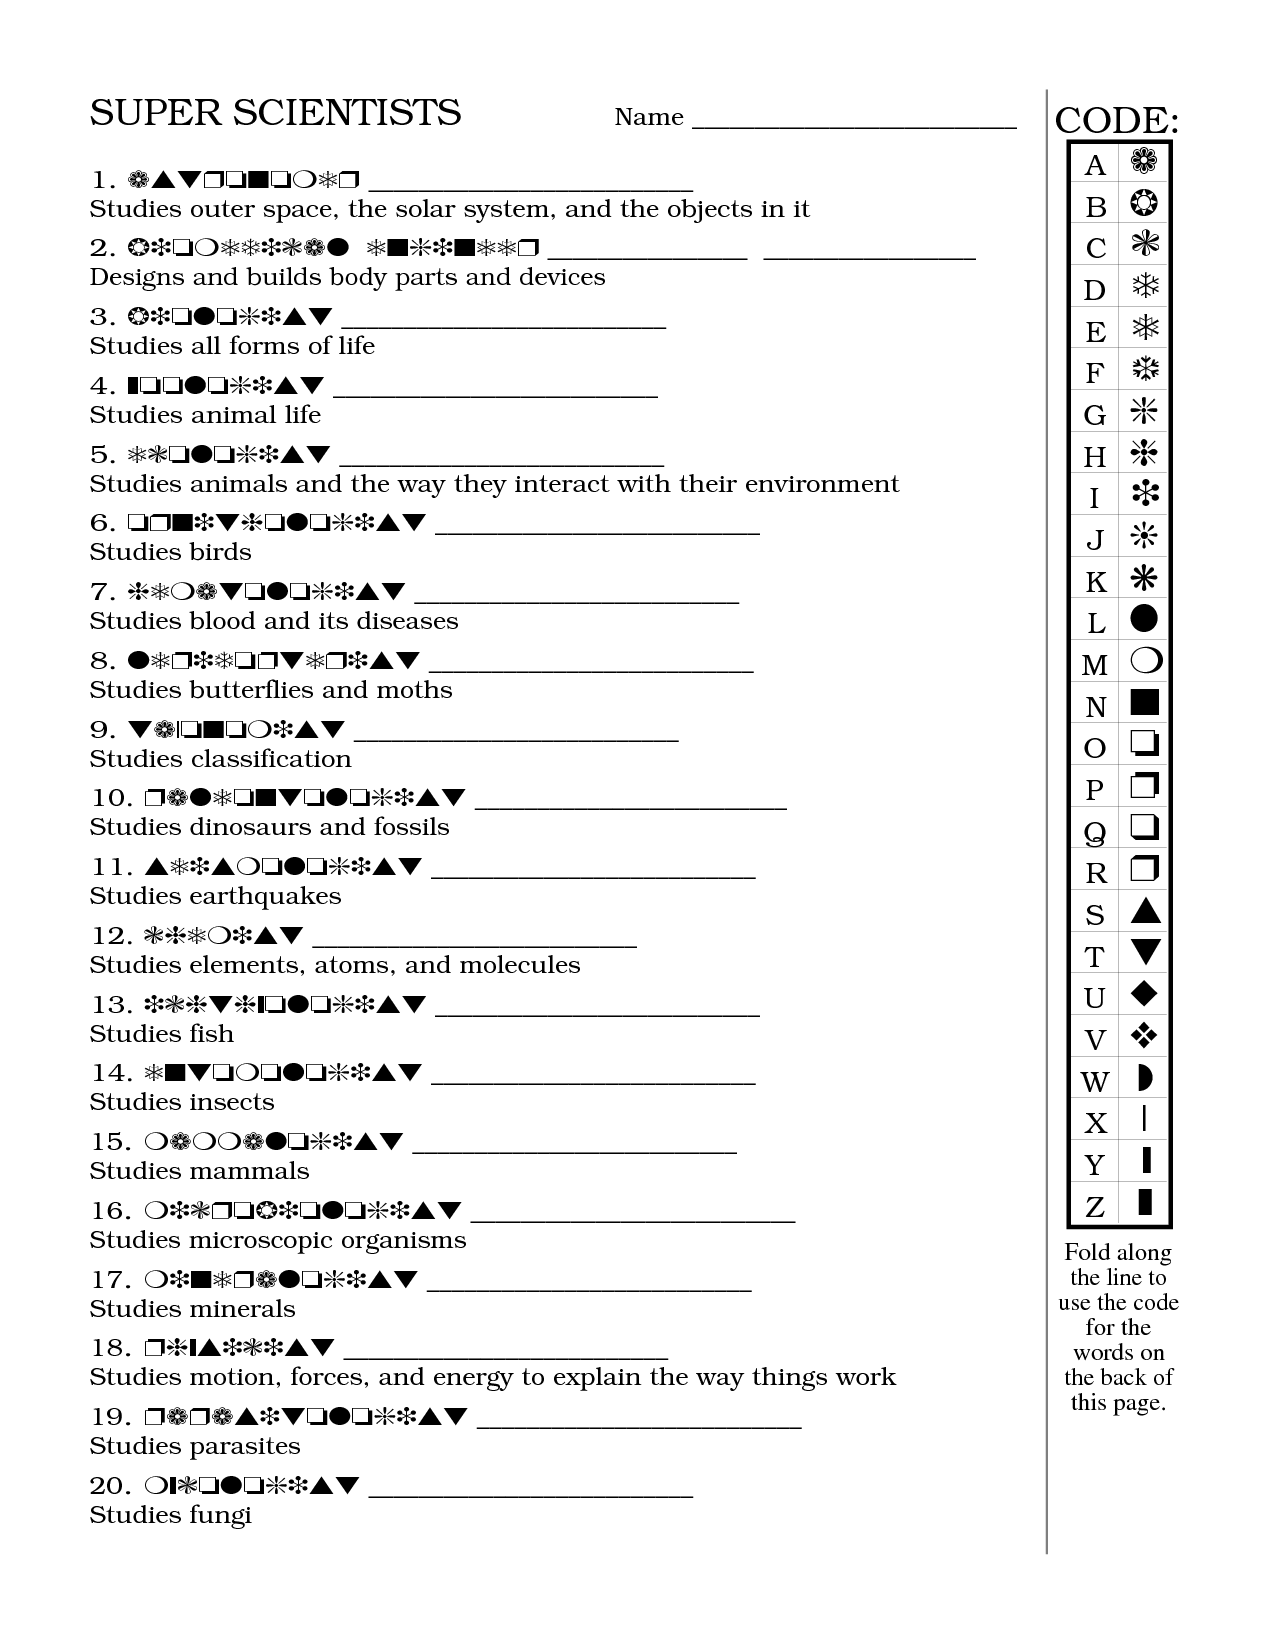 finale worksheets 2009 answers